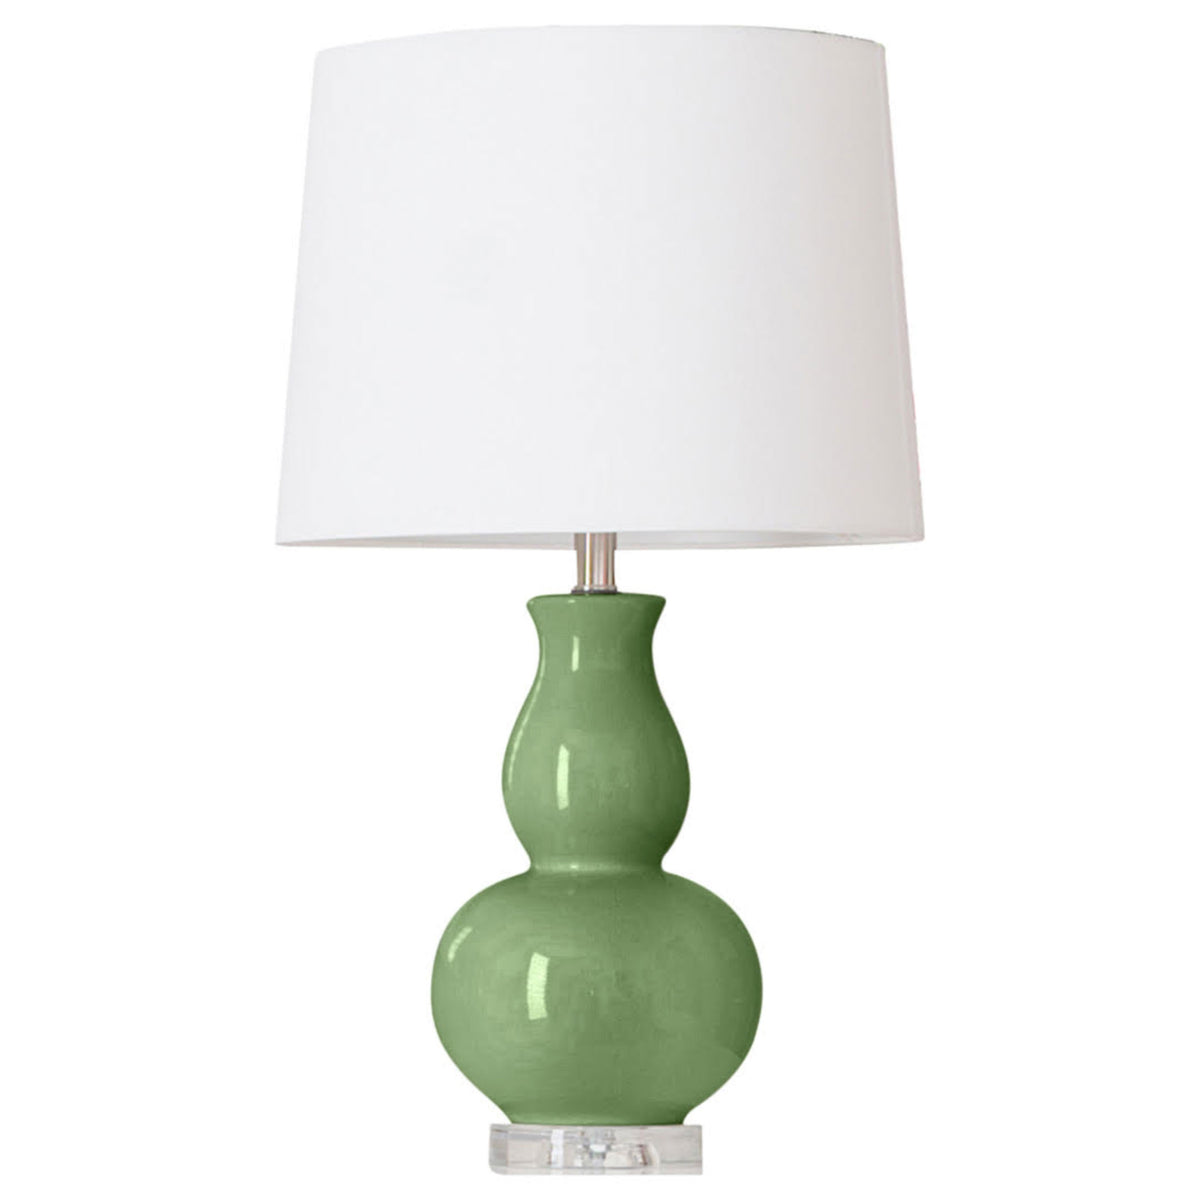 Forest Green Ceramic Lamp - 3 Shade Options